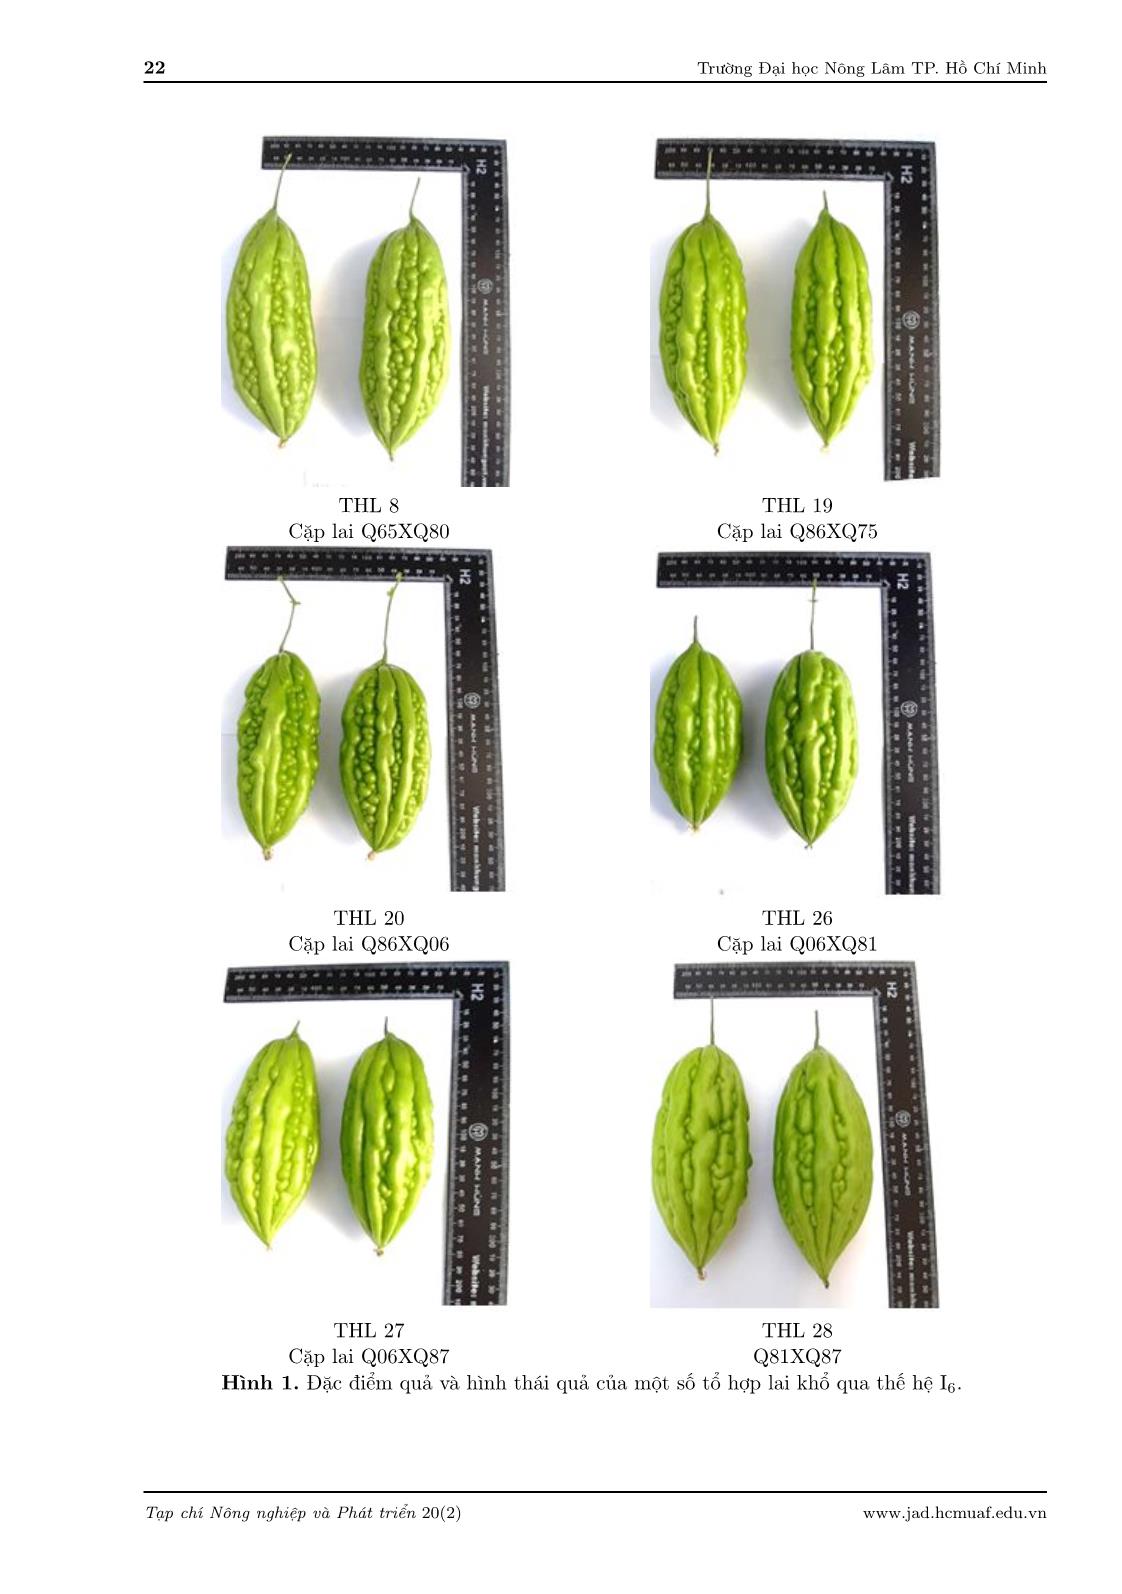 Estimation of the specific combining ability (SCA) of eight bitter gourd (Momordica charantia L.) inbred lines in the sixth generation trang 6